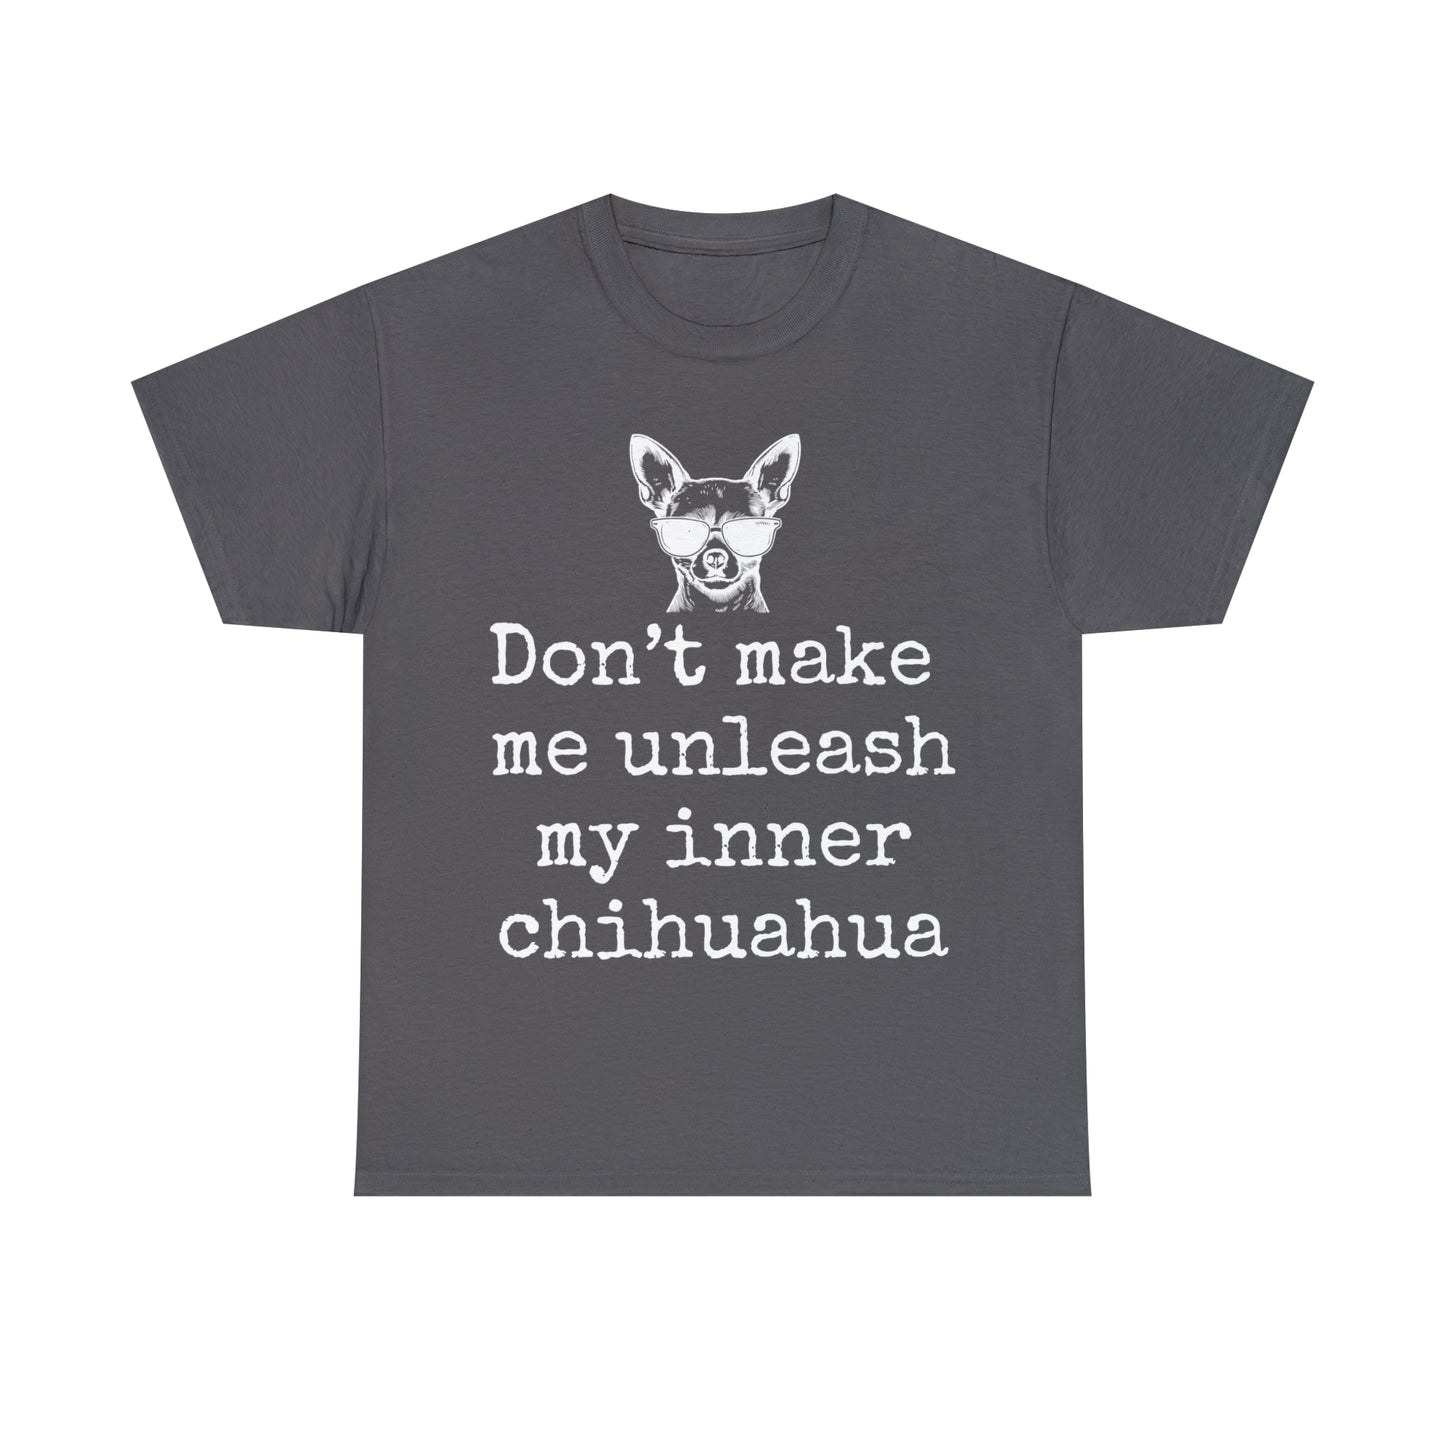 Don't make me unleash my inner chihuahua